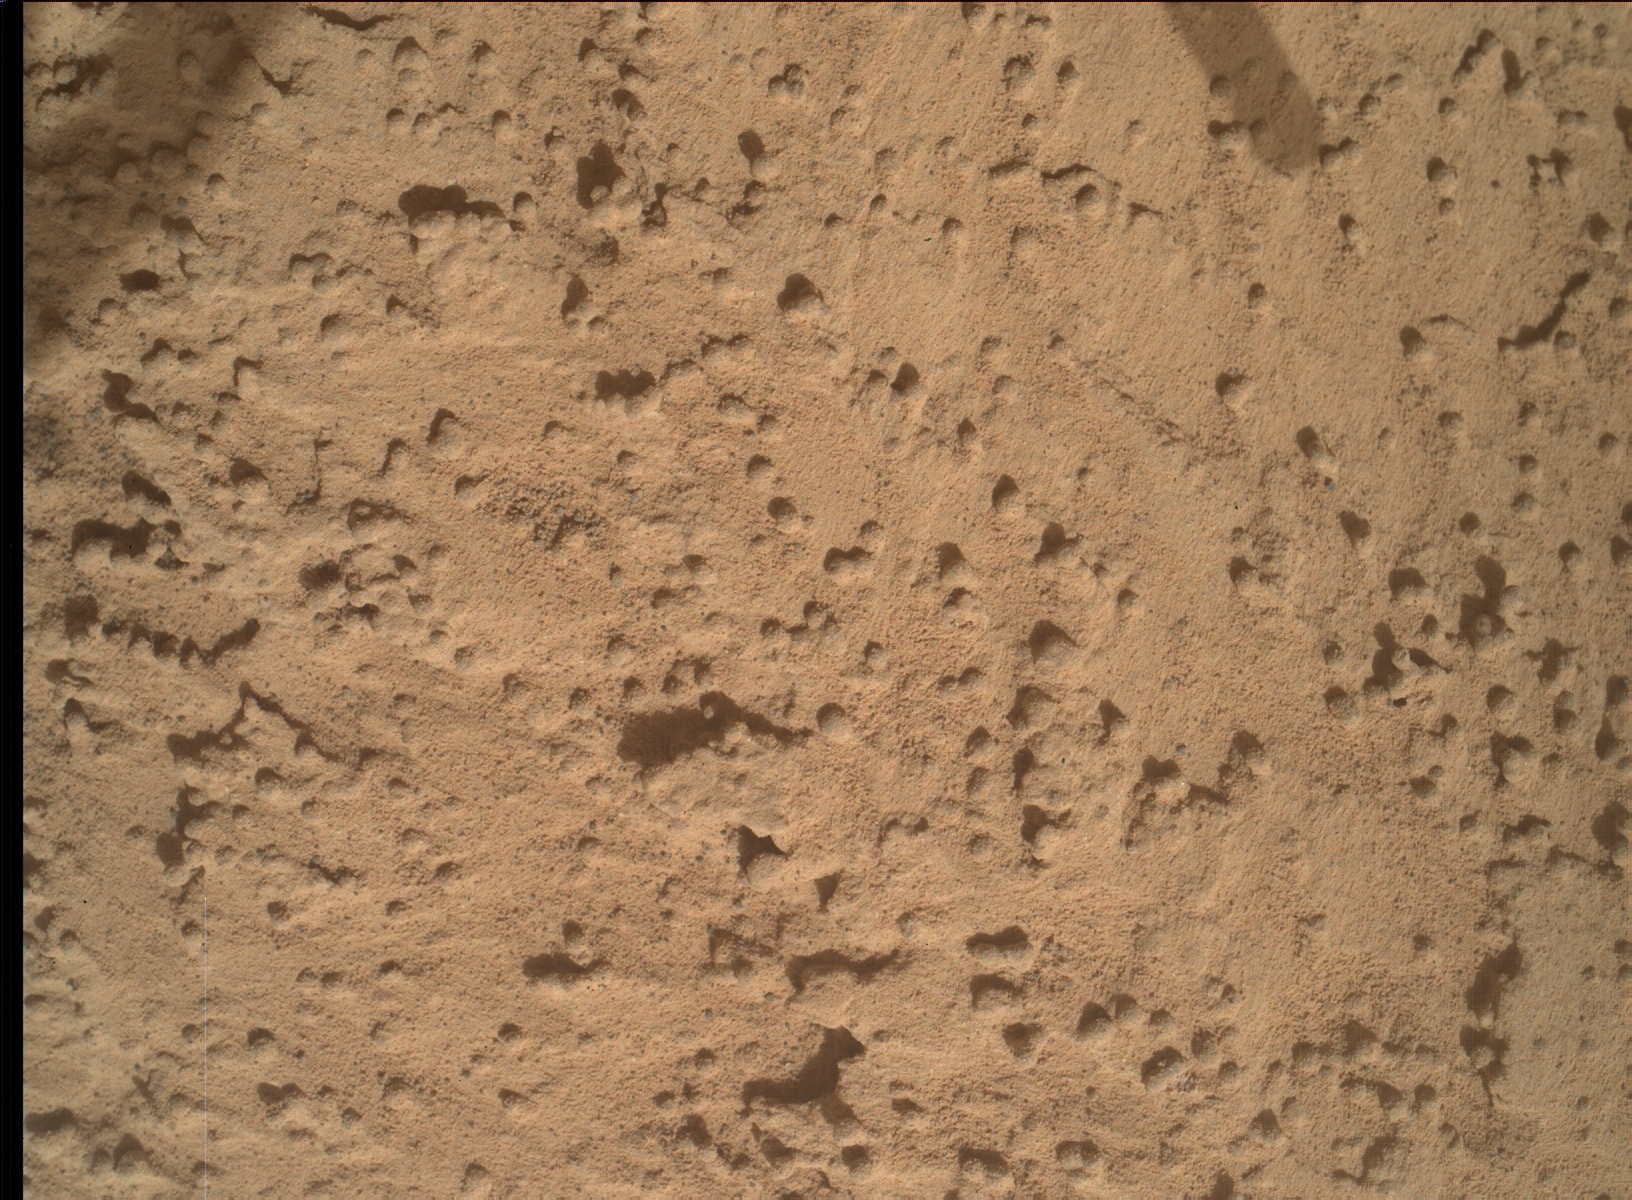 Nasa's Mars rover Curiosity acquired this image using its Mars Hand Lens Imager (MAHLI) on Sol 3383